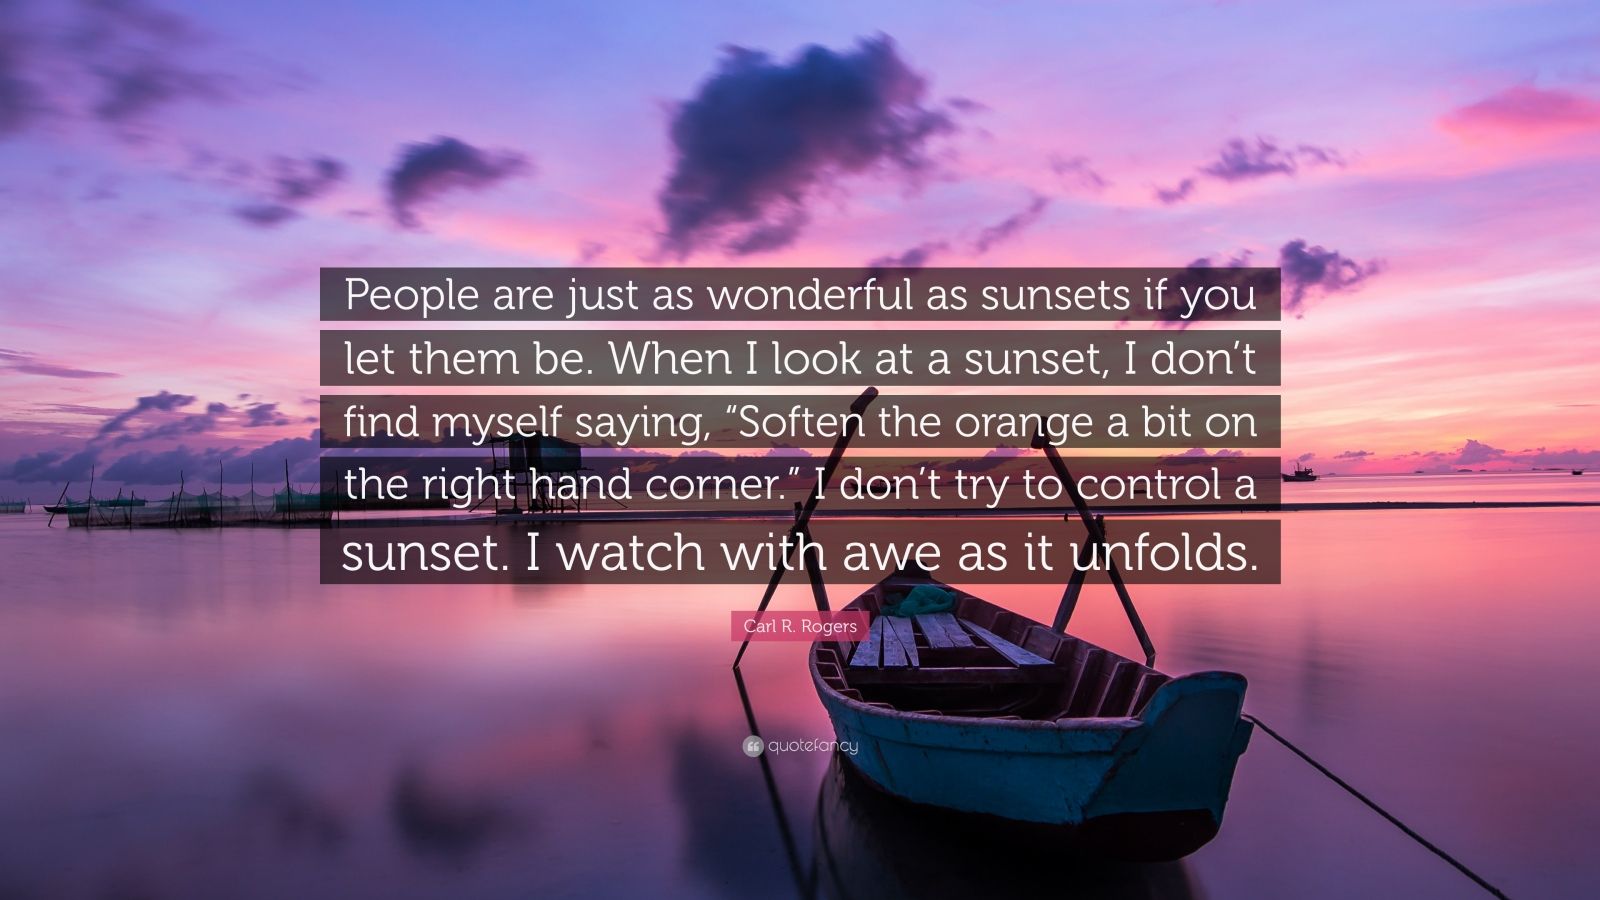 Carl R. Rogers Quote: “People are just as wonderful as sunsets if you